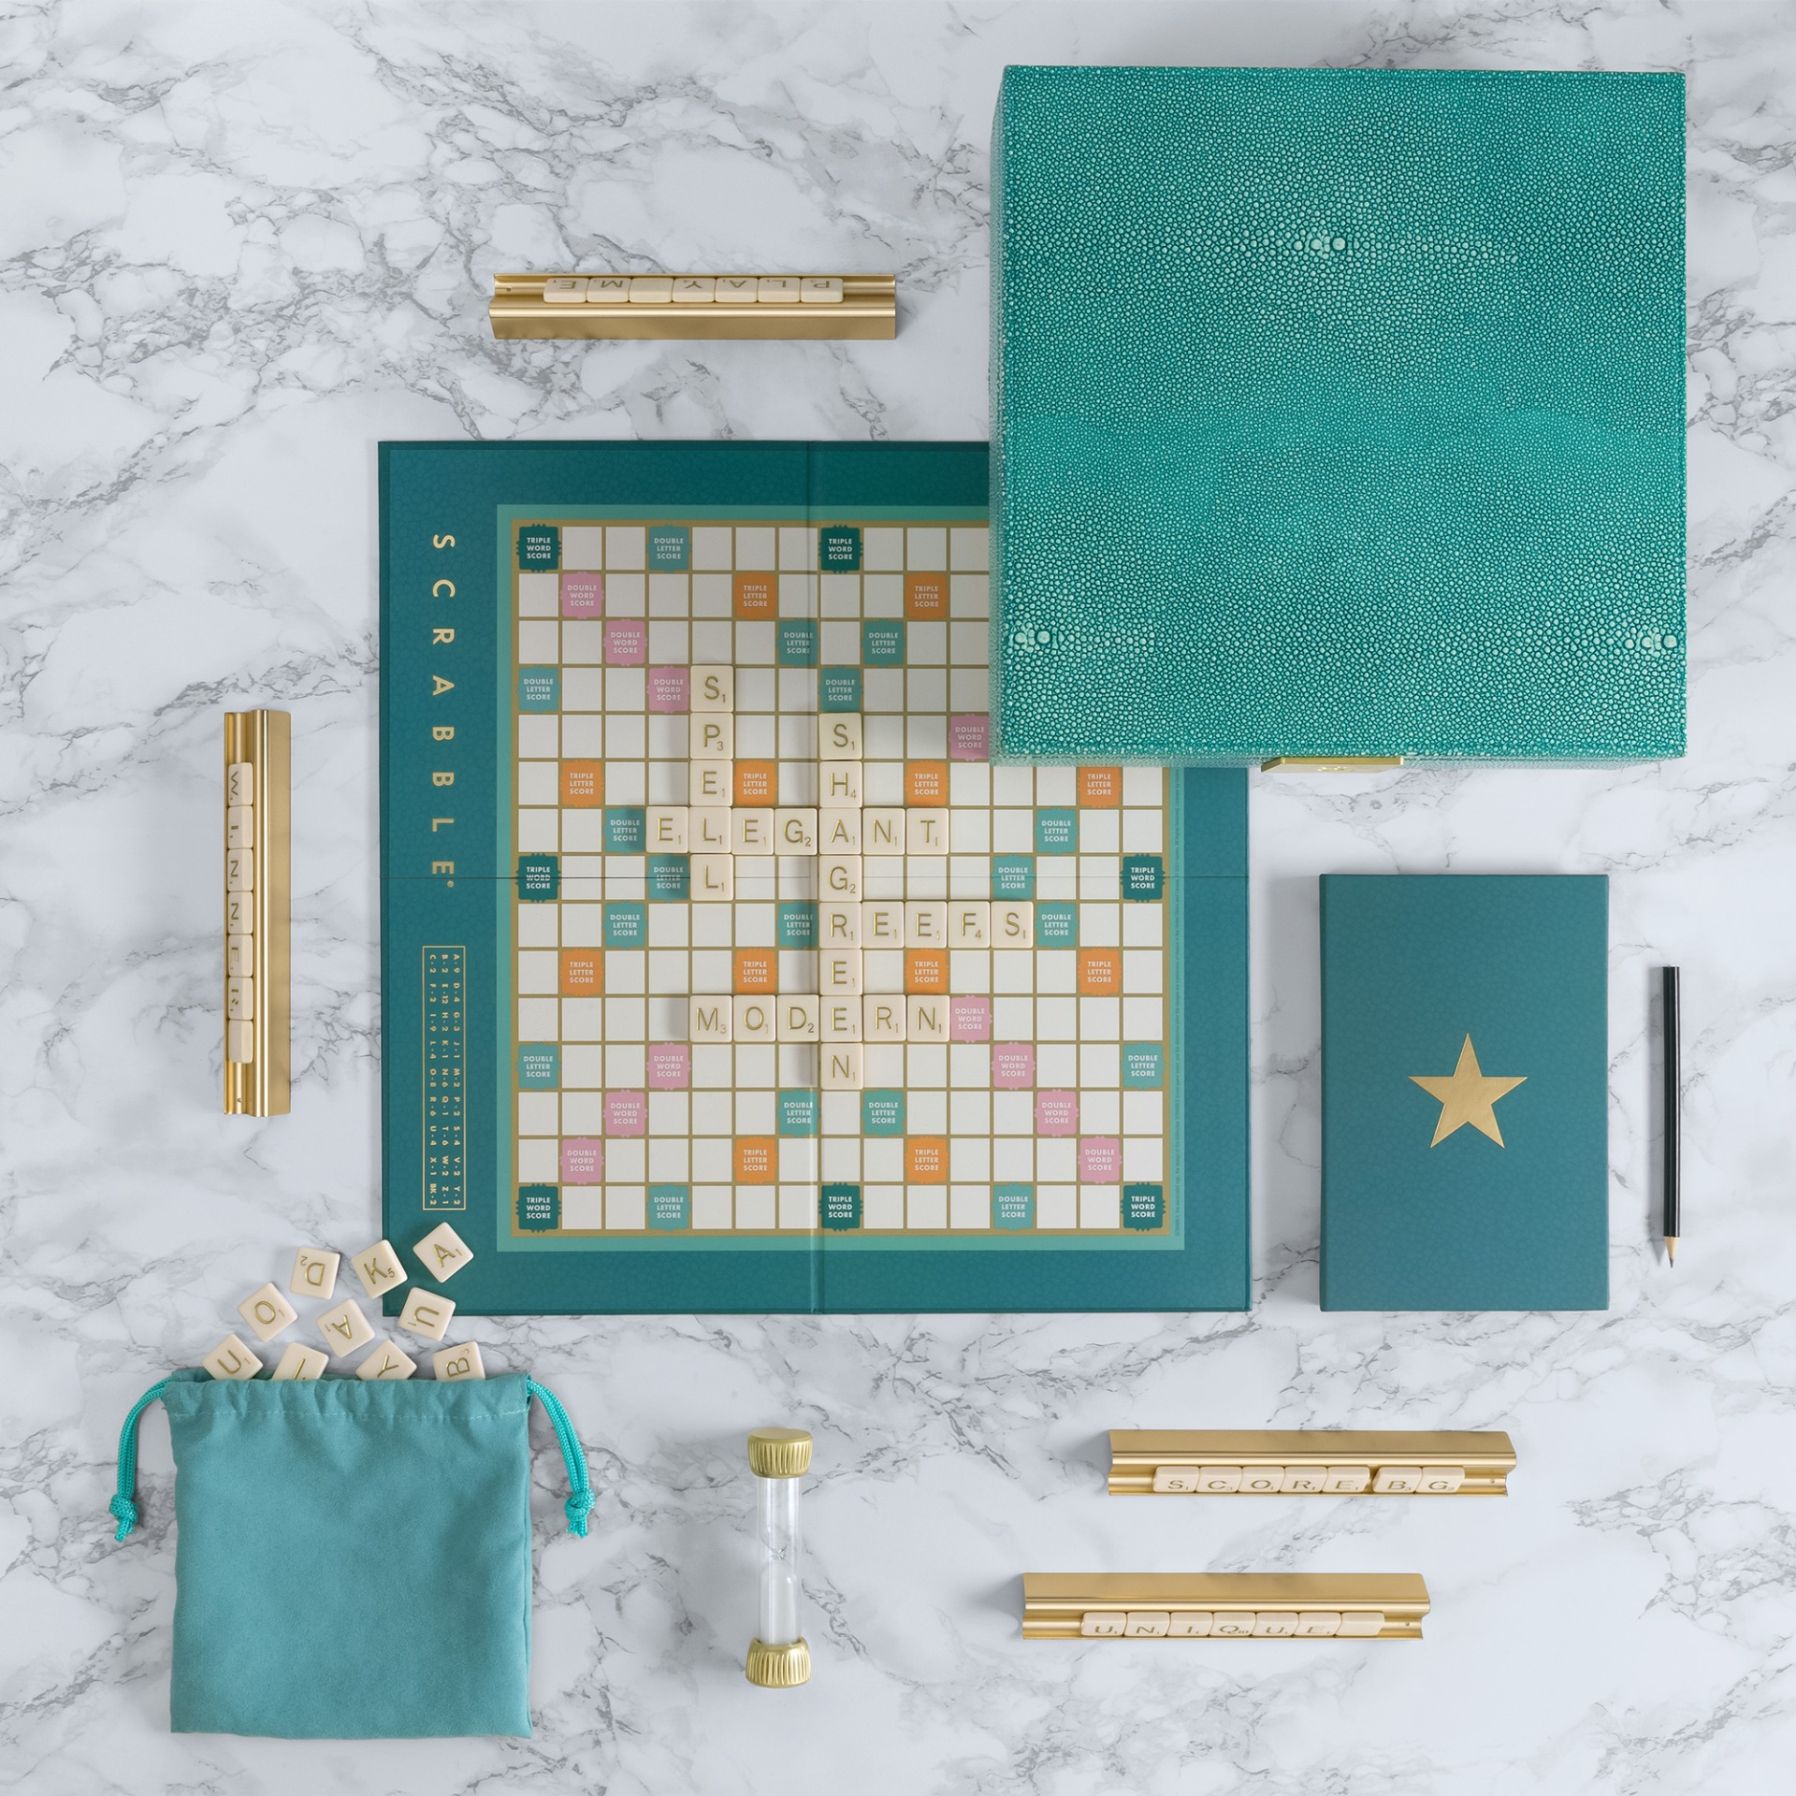 Scrabble Del Mar Shagreen Edition, WS GAME COMPANY - RSVP Style